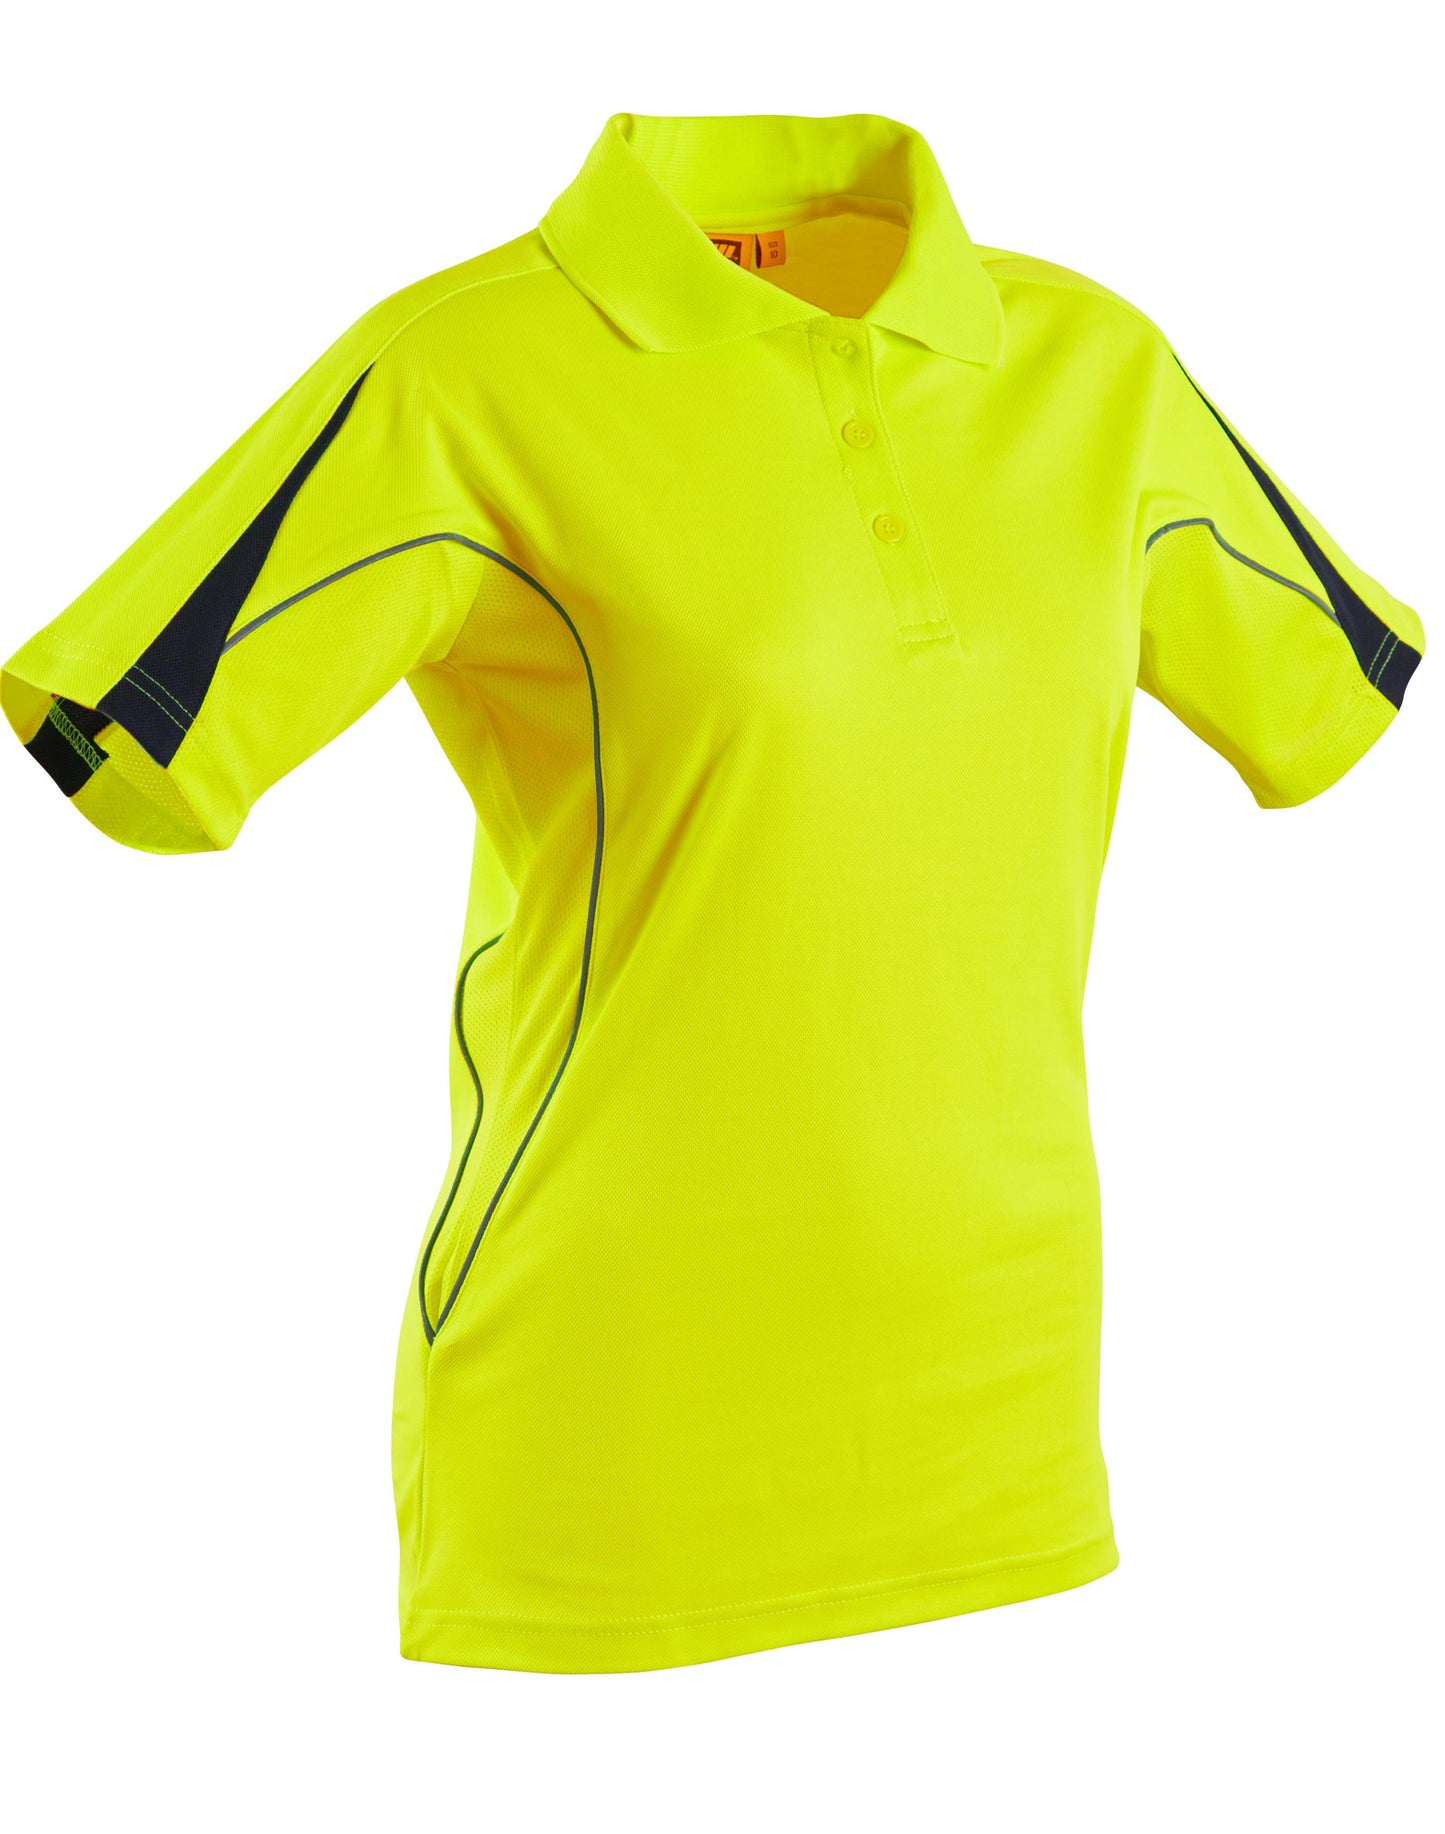 Truedry Ladies Short Sleeve Polo - made by AIW